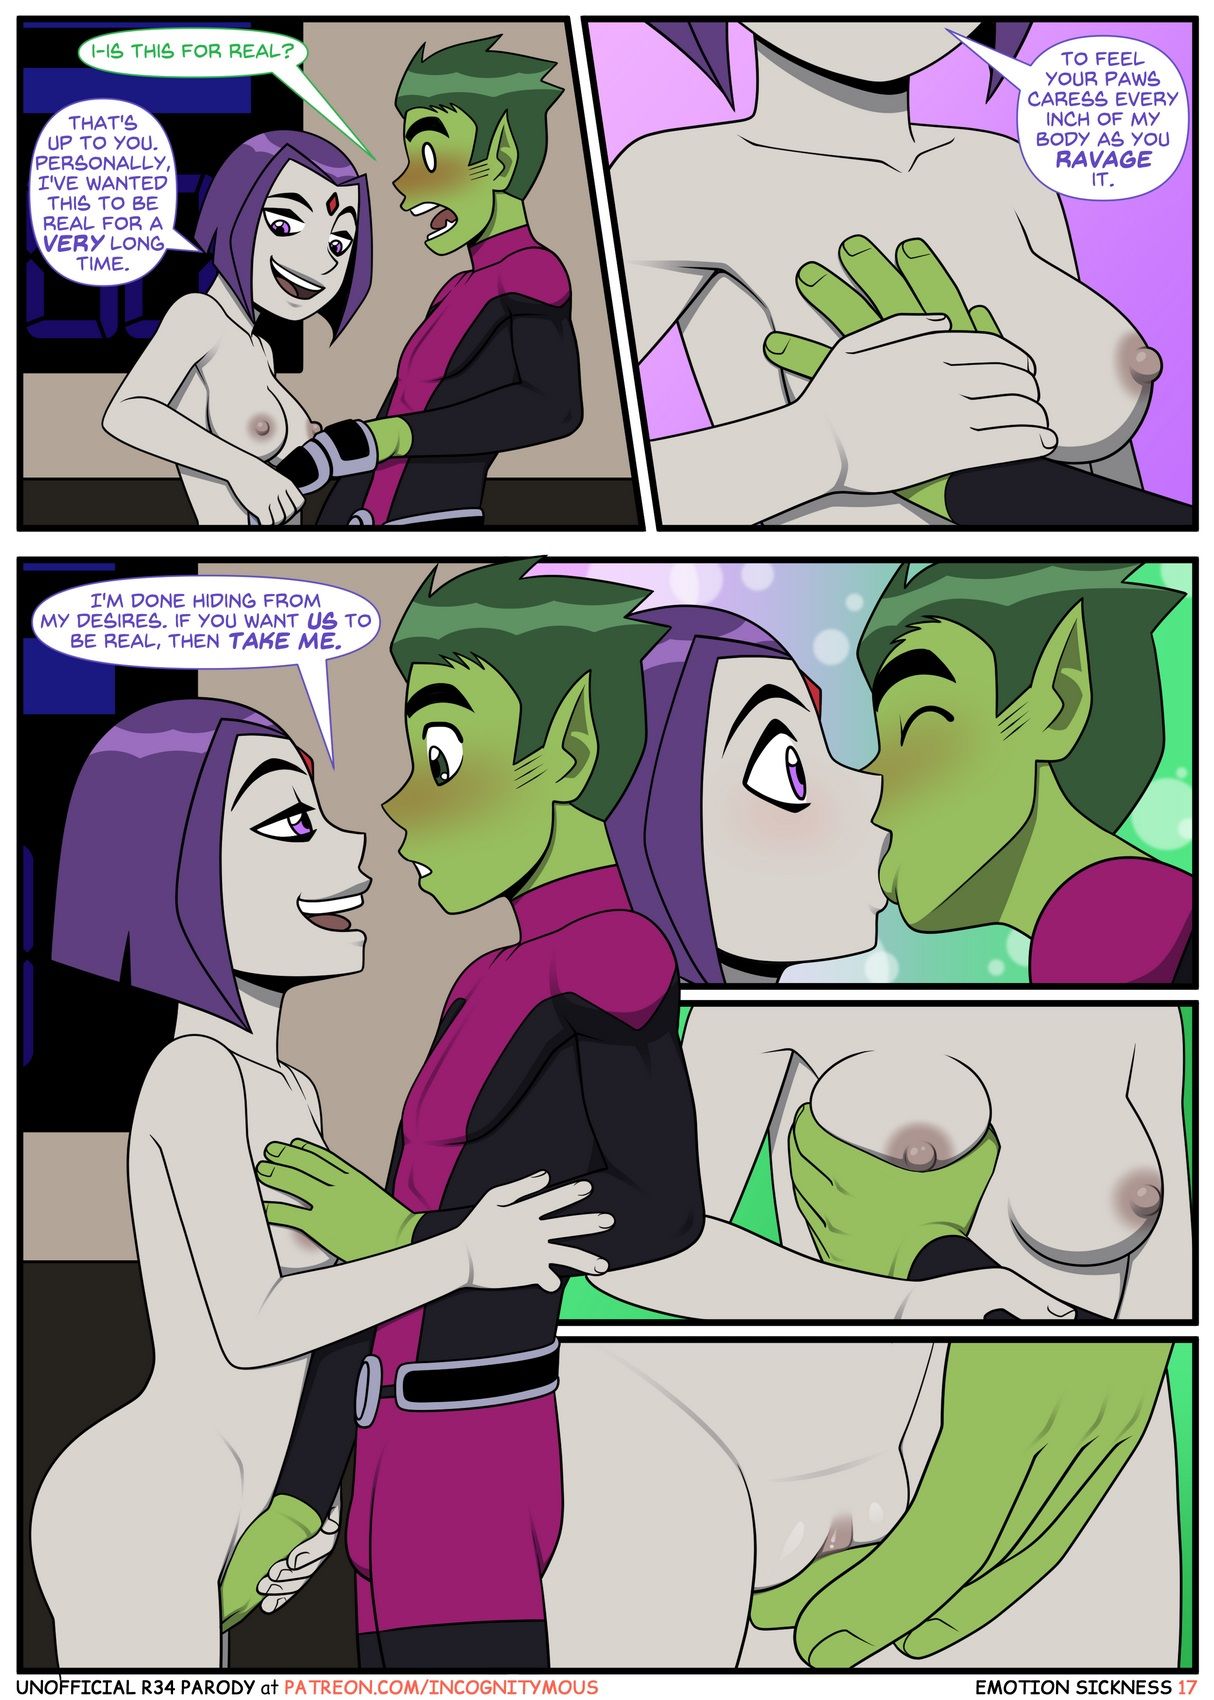 Teen Titans - Emotion Sickness (Incognitymous) page 33